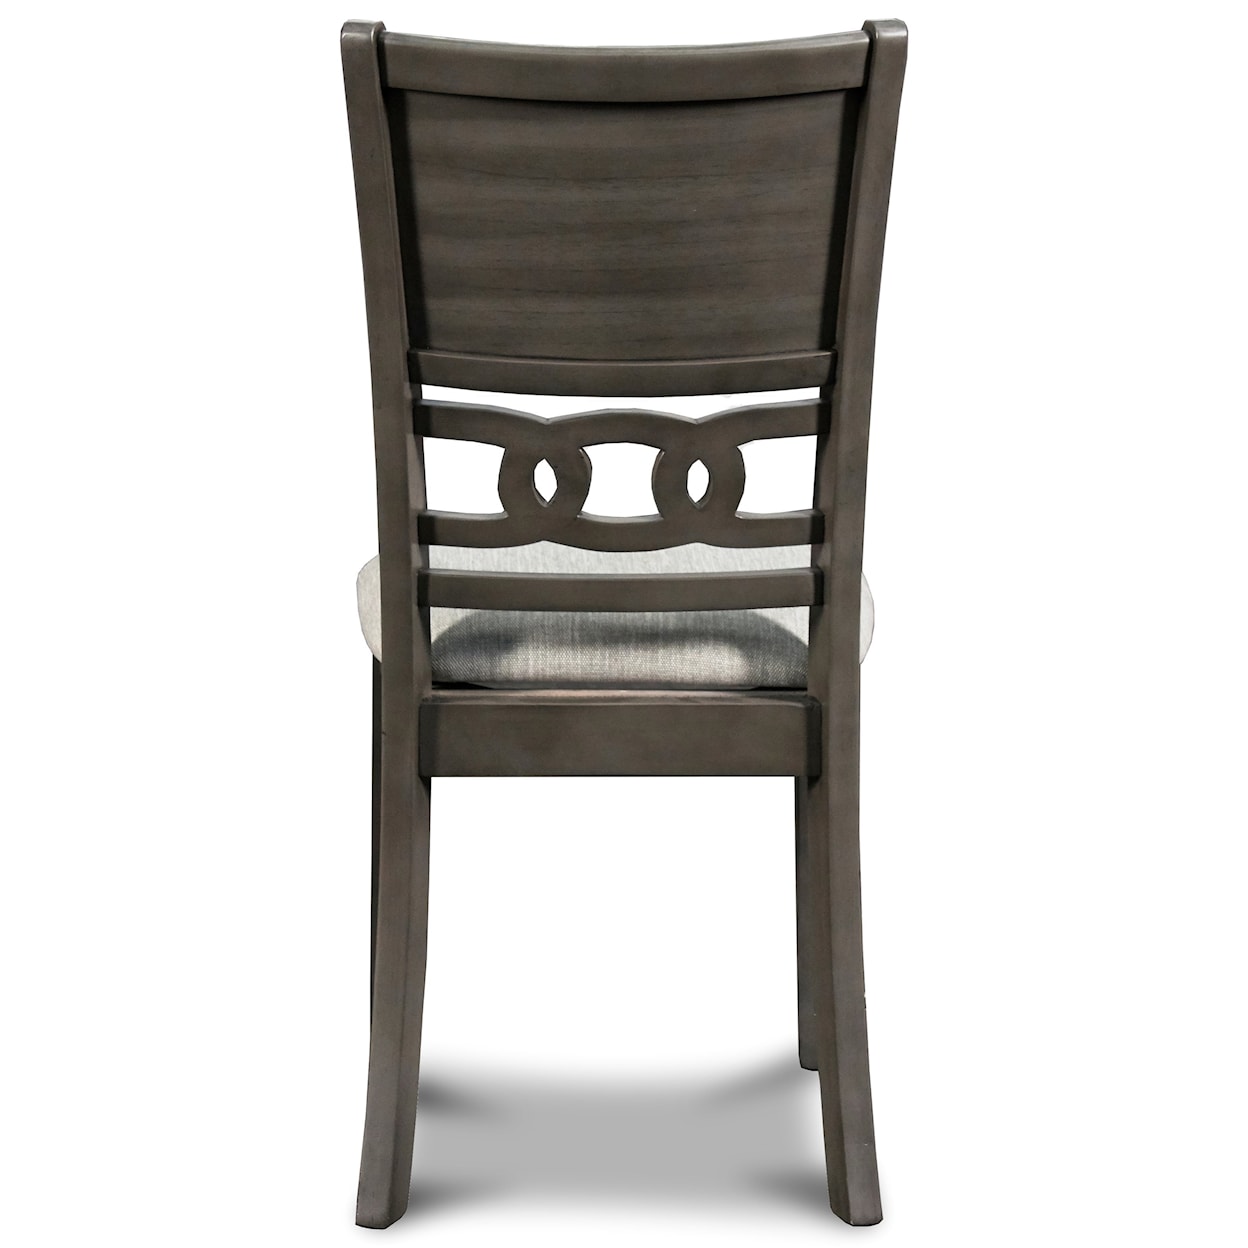 New Classic Gia Dining Chair